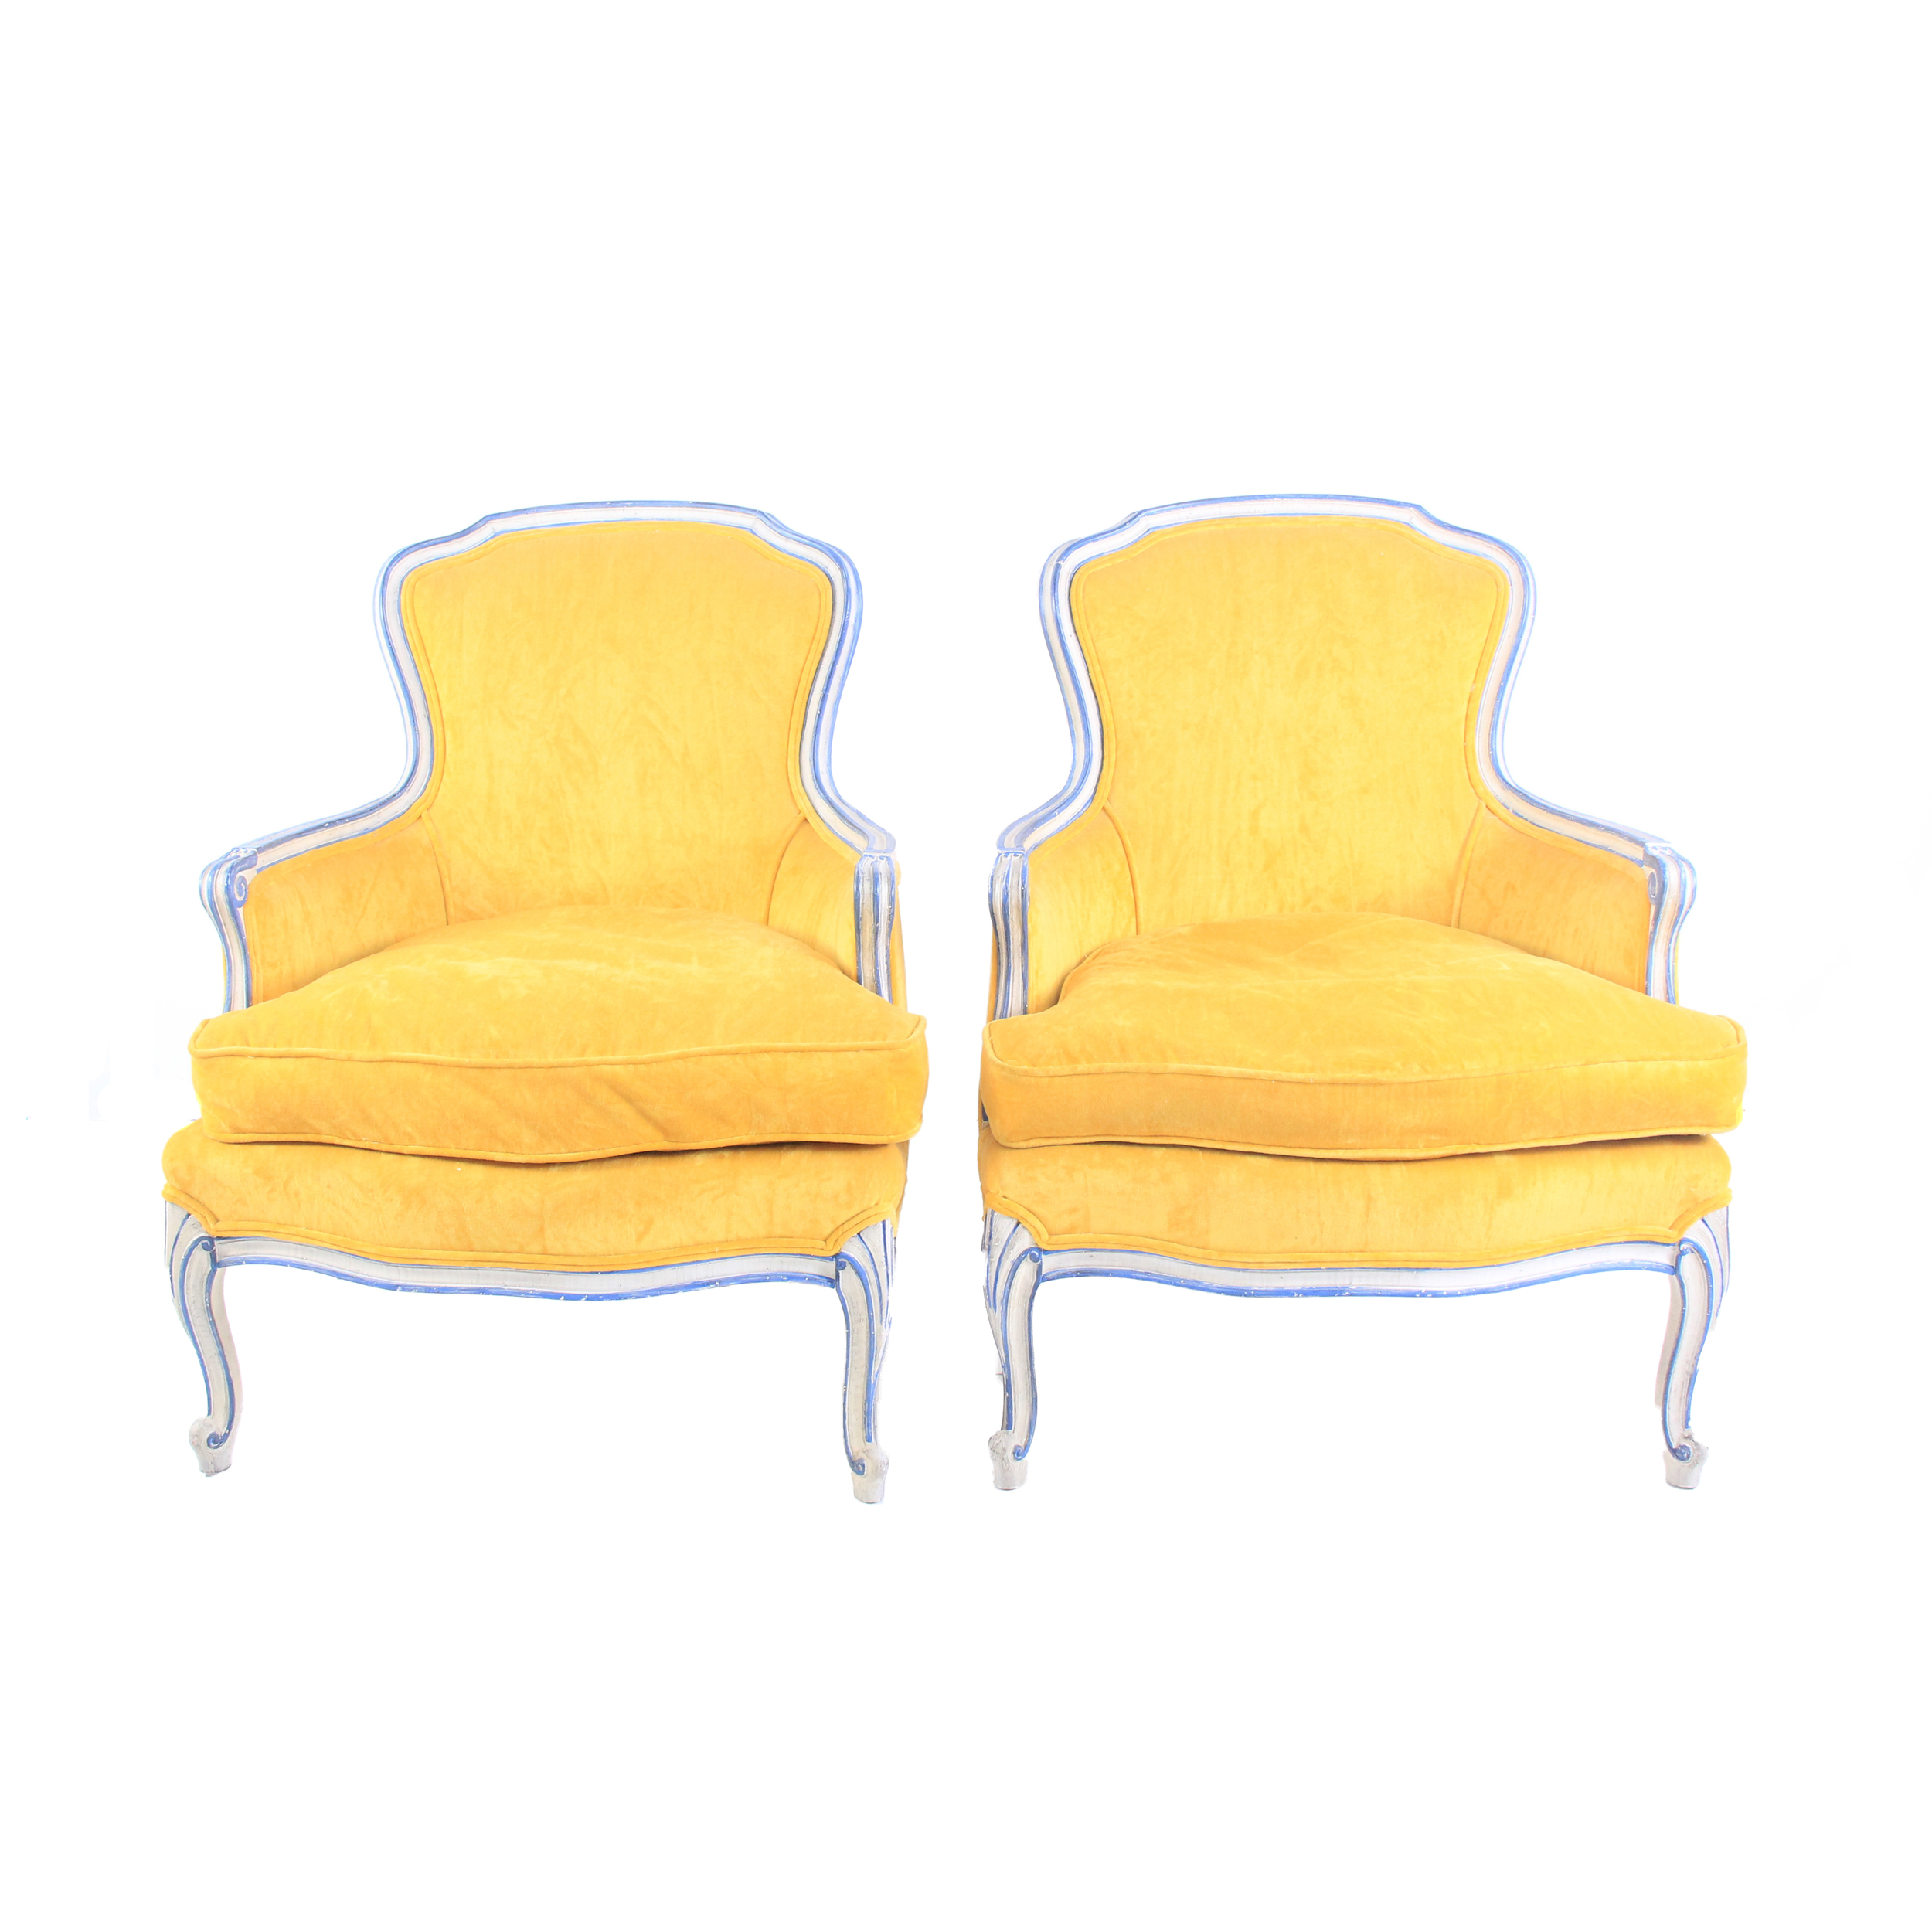 Vintage French Provincial Yellow Chairs